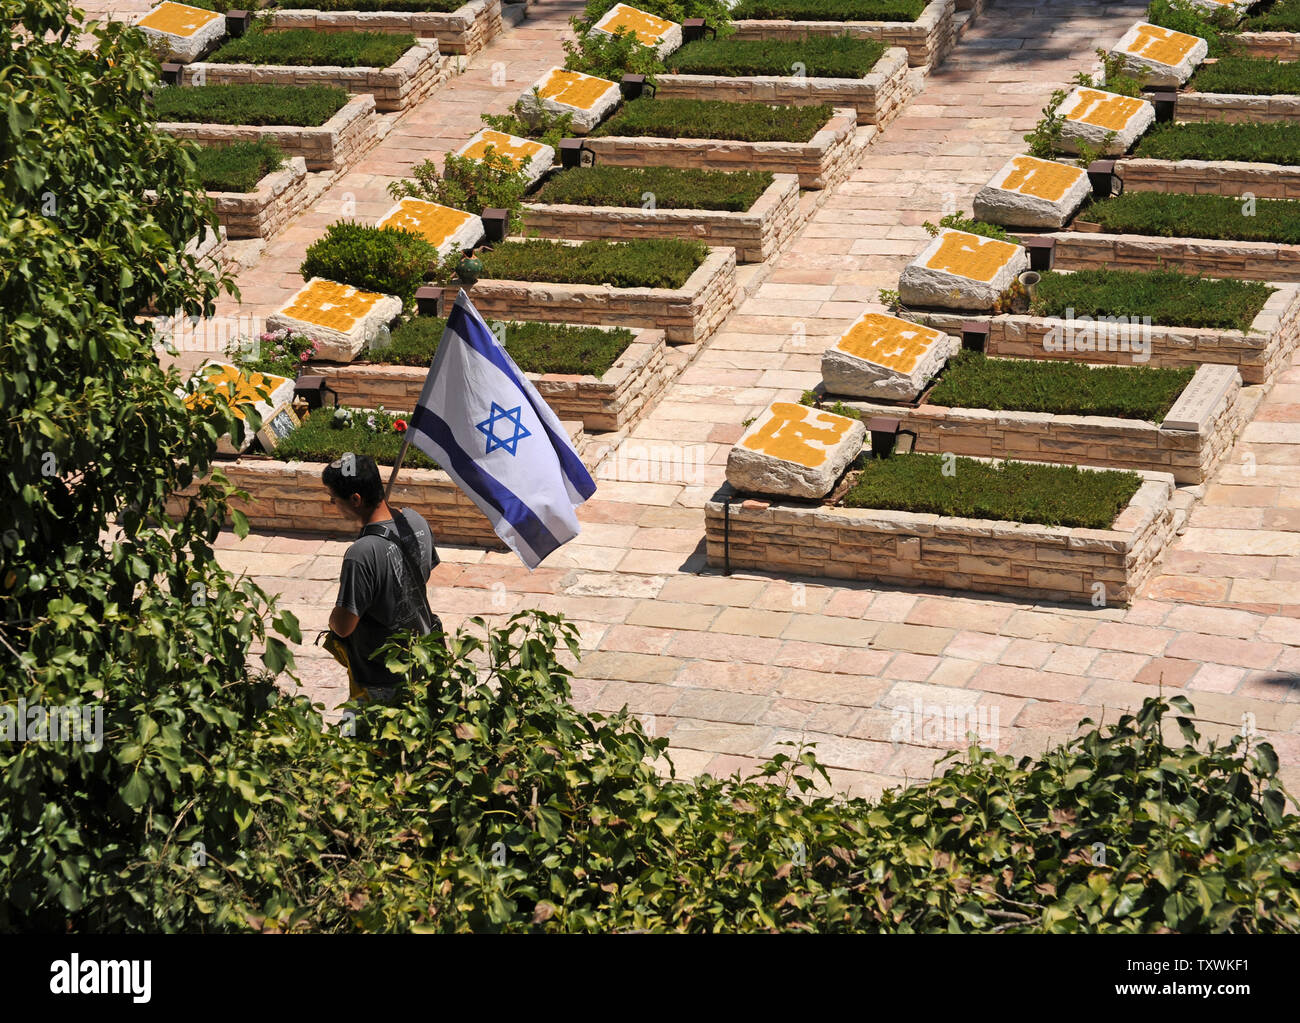 An Israeli carries the national flag during the funeral of American-Israeli soldier Max Steinberg, 24, in the military cemetery on Mt. Herzl in Jerusalem, Israel, July 23, 2014.  Steinberg, a native of Los Angeles, California, immigrated to Israel and enlisted in the Israel Defense Forces in 2012, where he served as a sharpshooter in the elite Golani Brigade. He was among the 13 soldiers killed by Palestinian militants in the Gaza Strip on Sunday. Twenty-nine Israeli troops have been killed since the army launched a ground incursion into Gaza last week. More than 30,000 people attended the fun Stock Photo